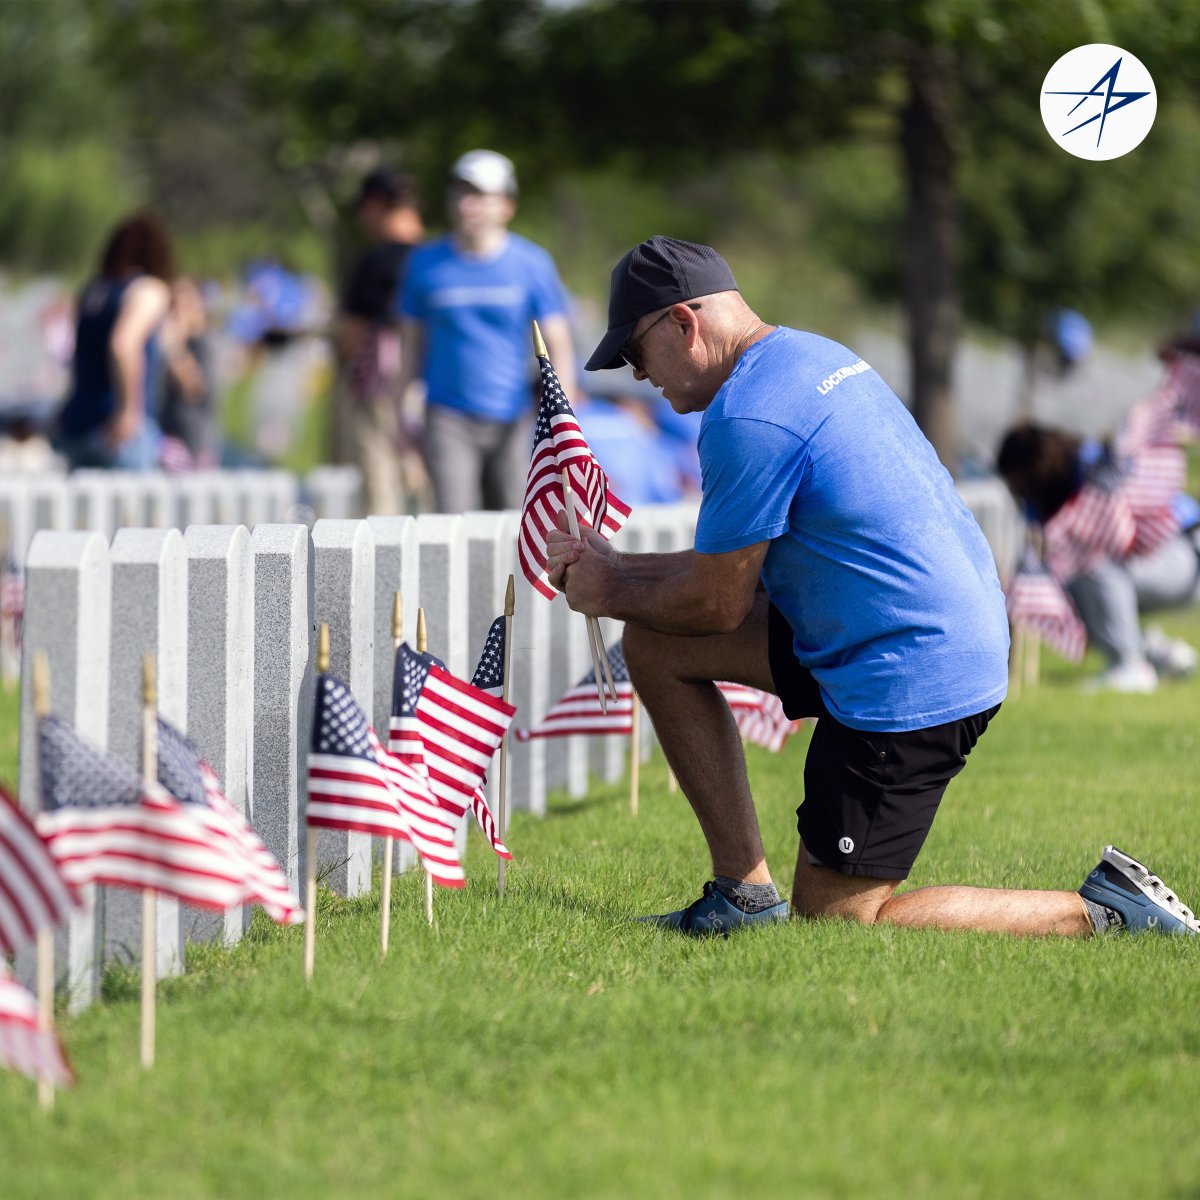 This #MemorialDay, we're taking a moment to pay tribute to the courageous service members who made the ultimate sacrifice.